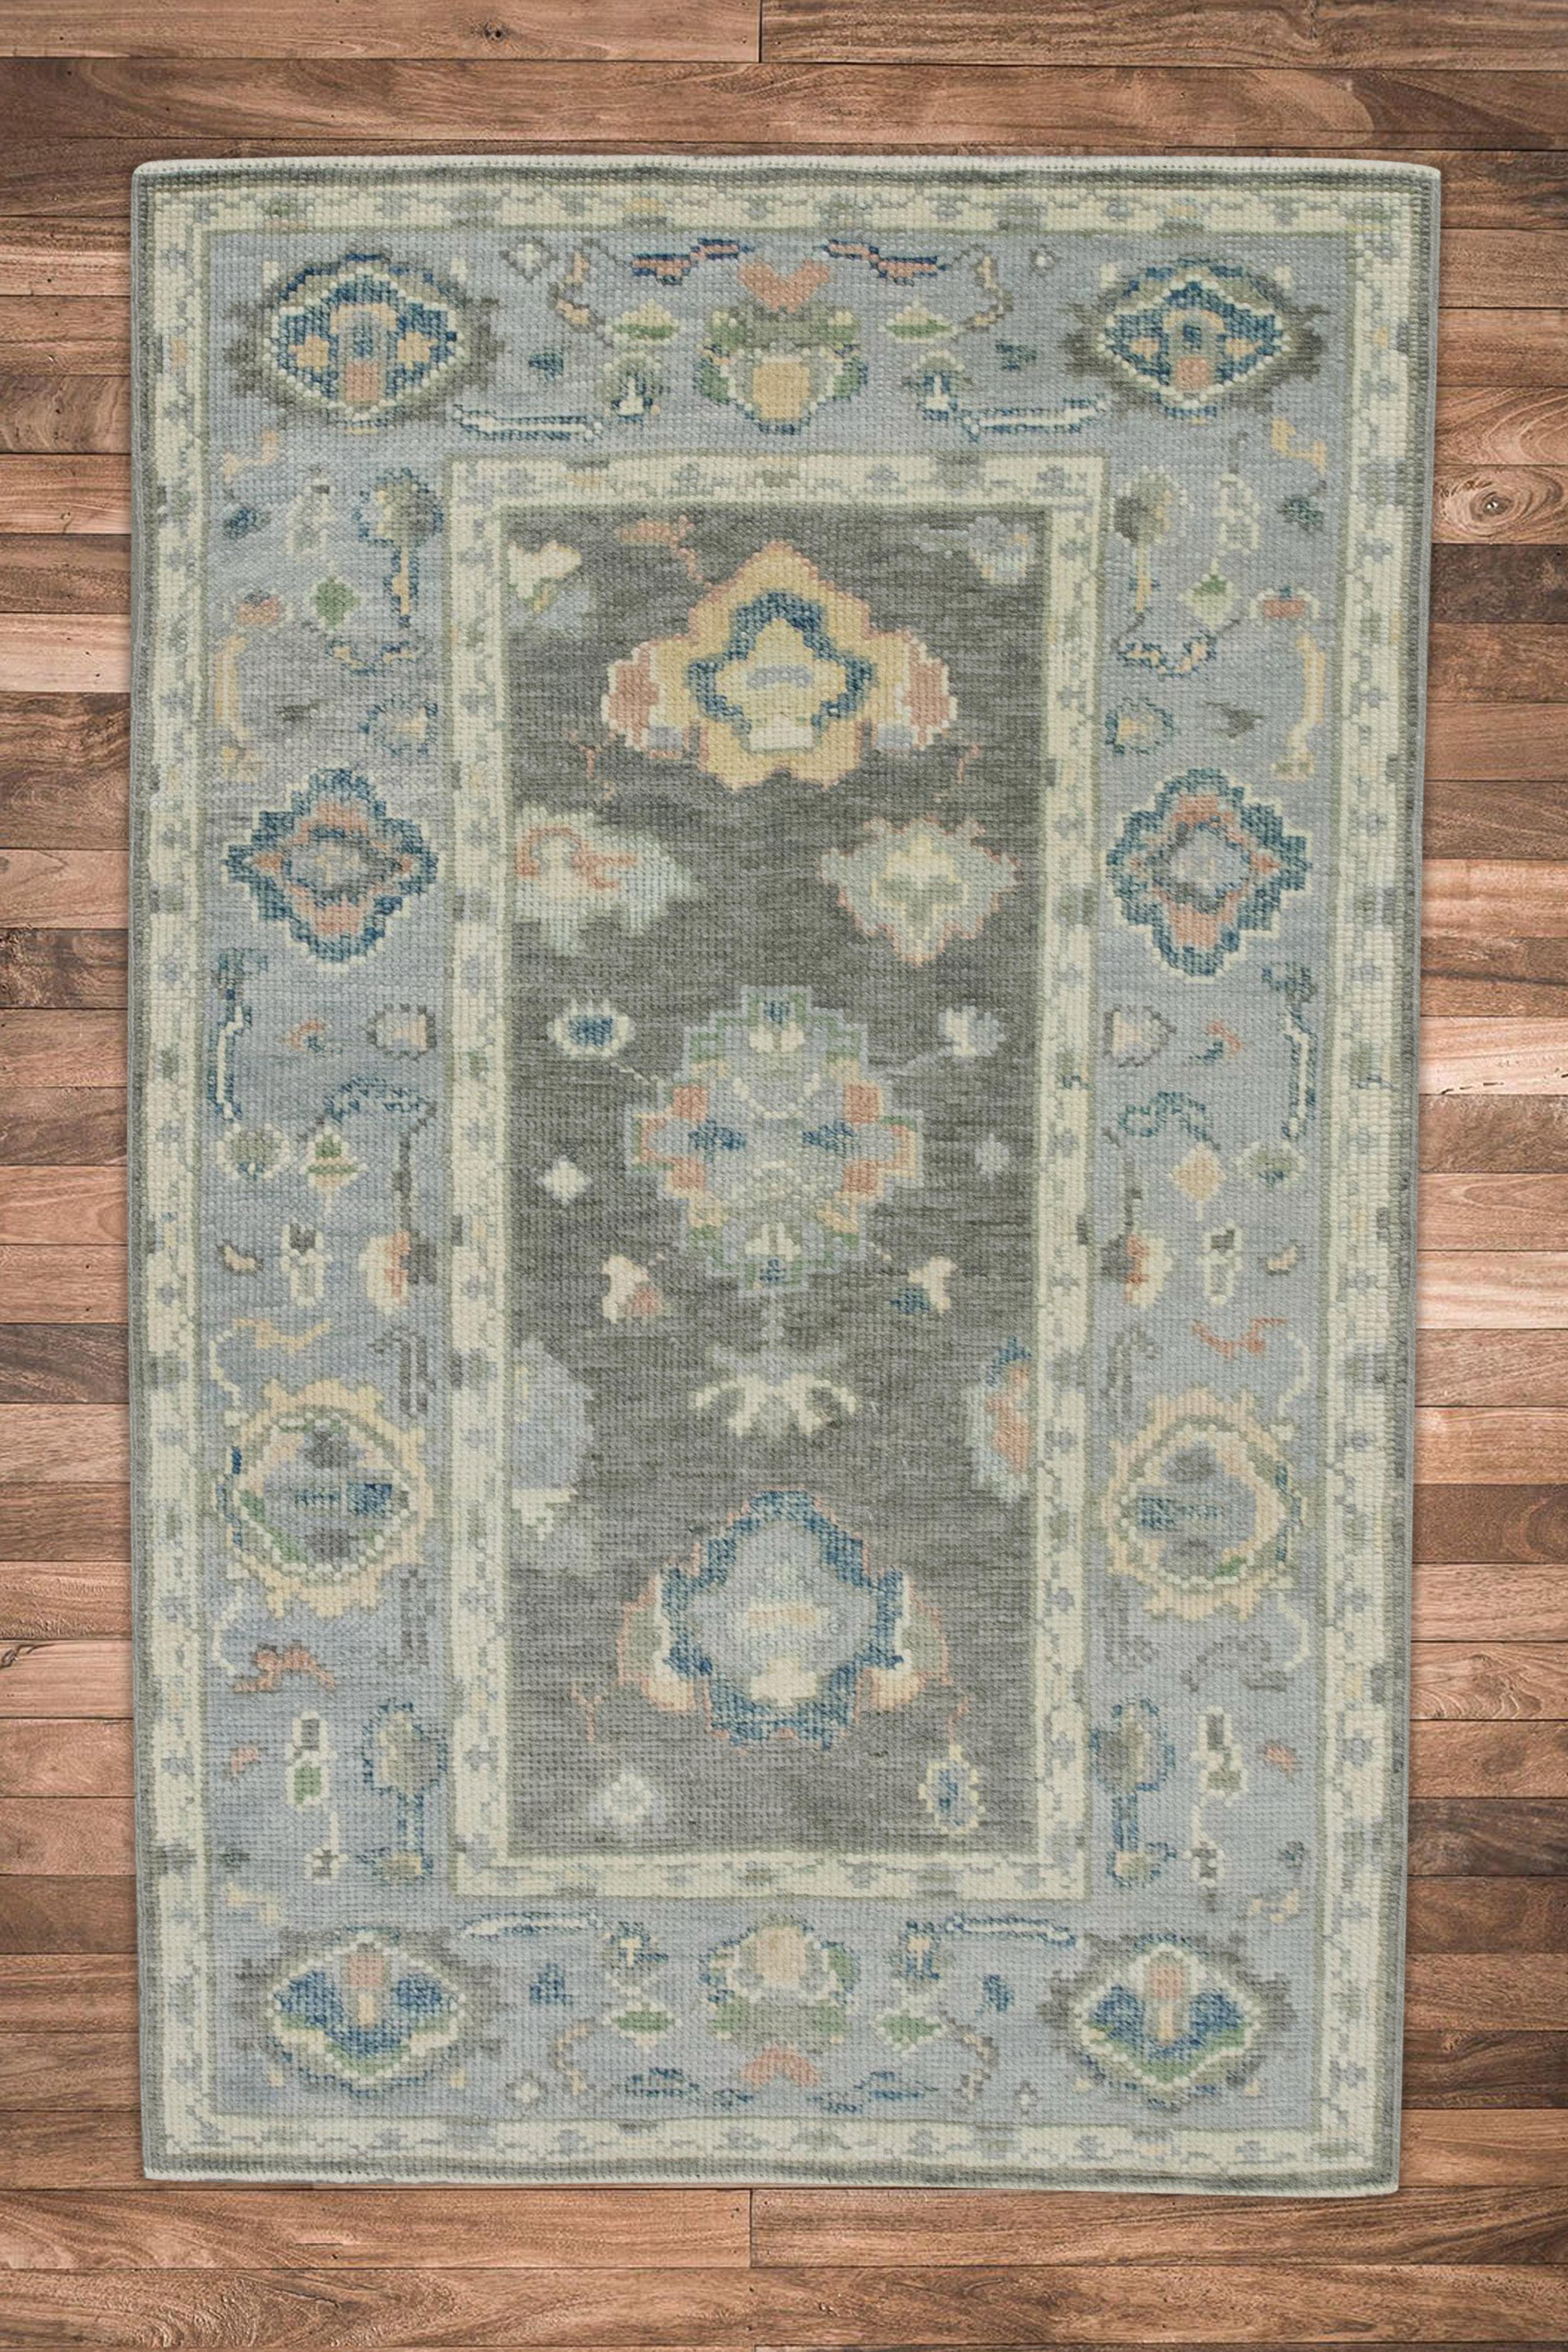 Contemporary Charcoal & Blue Floral Design Handwoven Wool Turkish Oushak Rug 3' x 4'9